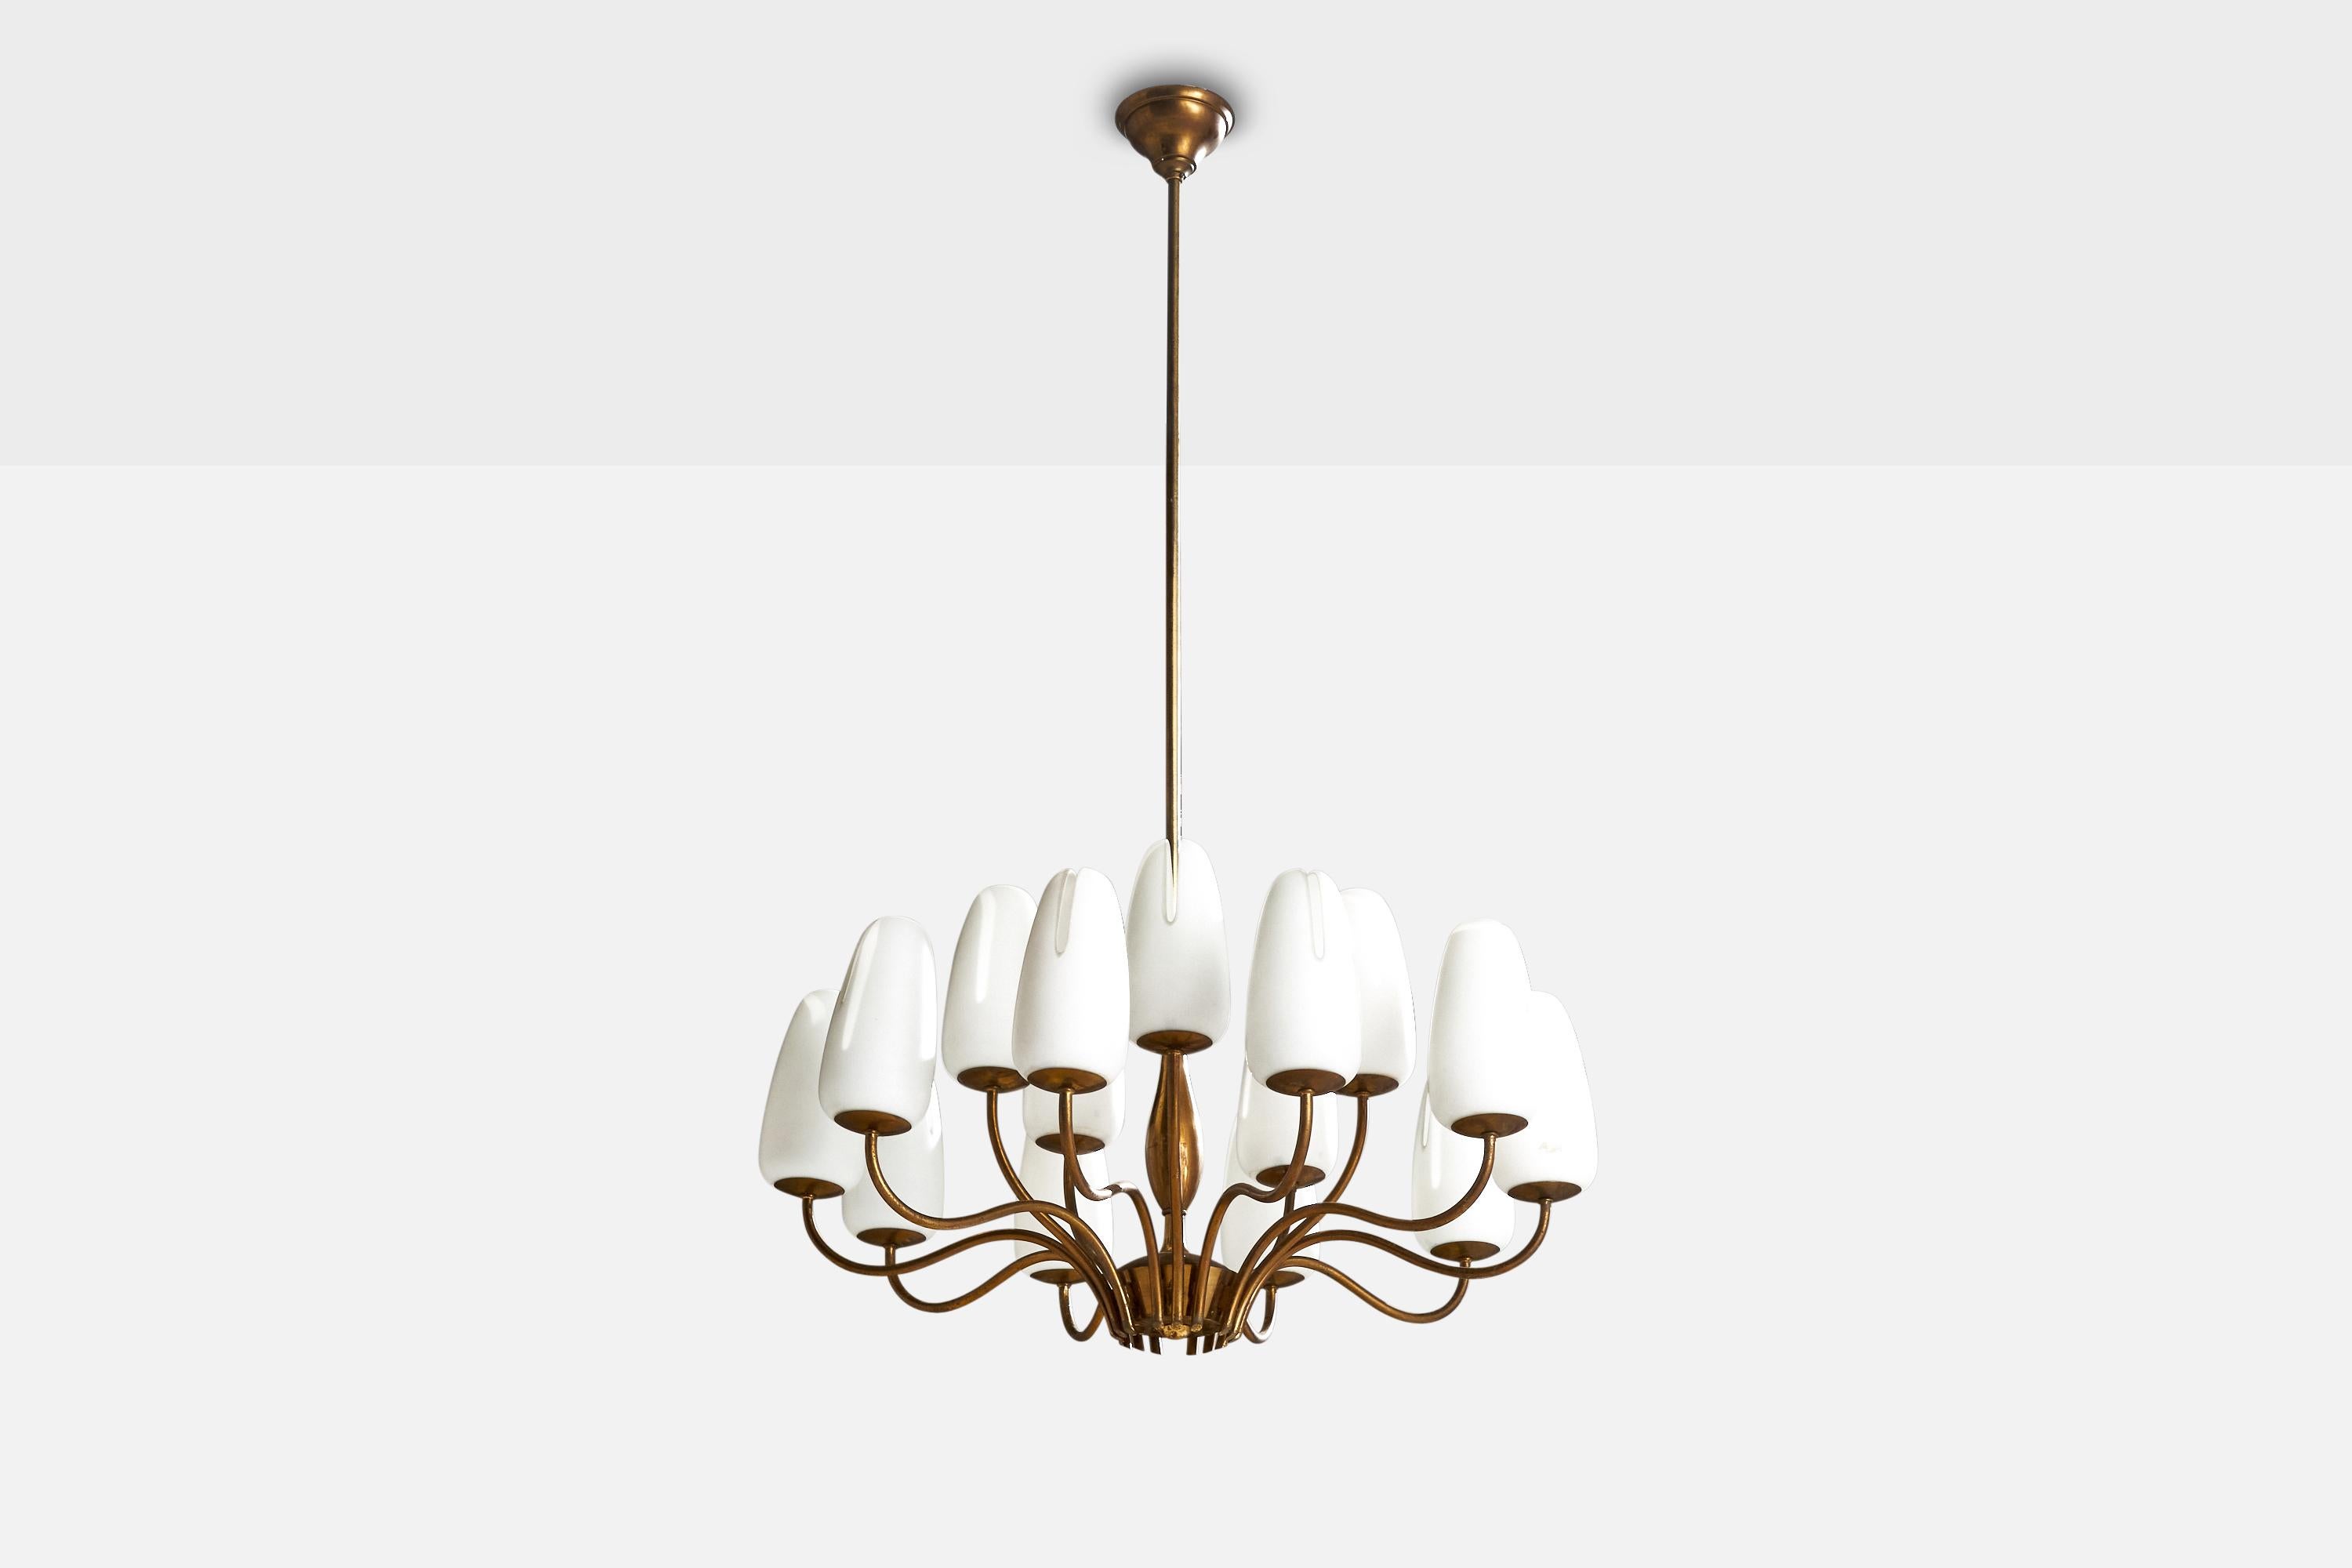 A sizeable brass and opaline glass chandelier designed and produced in Italy, 1950s.

Dimensions of canopy (inches): 2.5” H x 4.5”  Diameter
Socket takes standard E-14 bulbs. 15 sockets.There is no maximum wattage stated on the fixture. All lighting